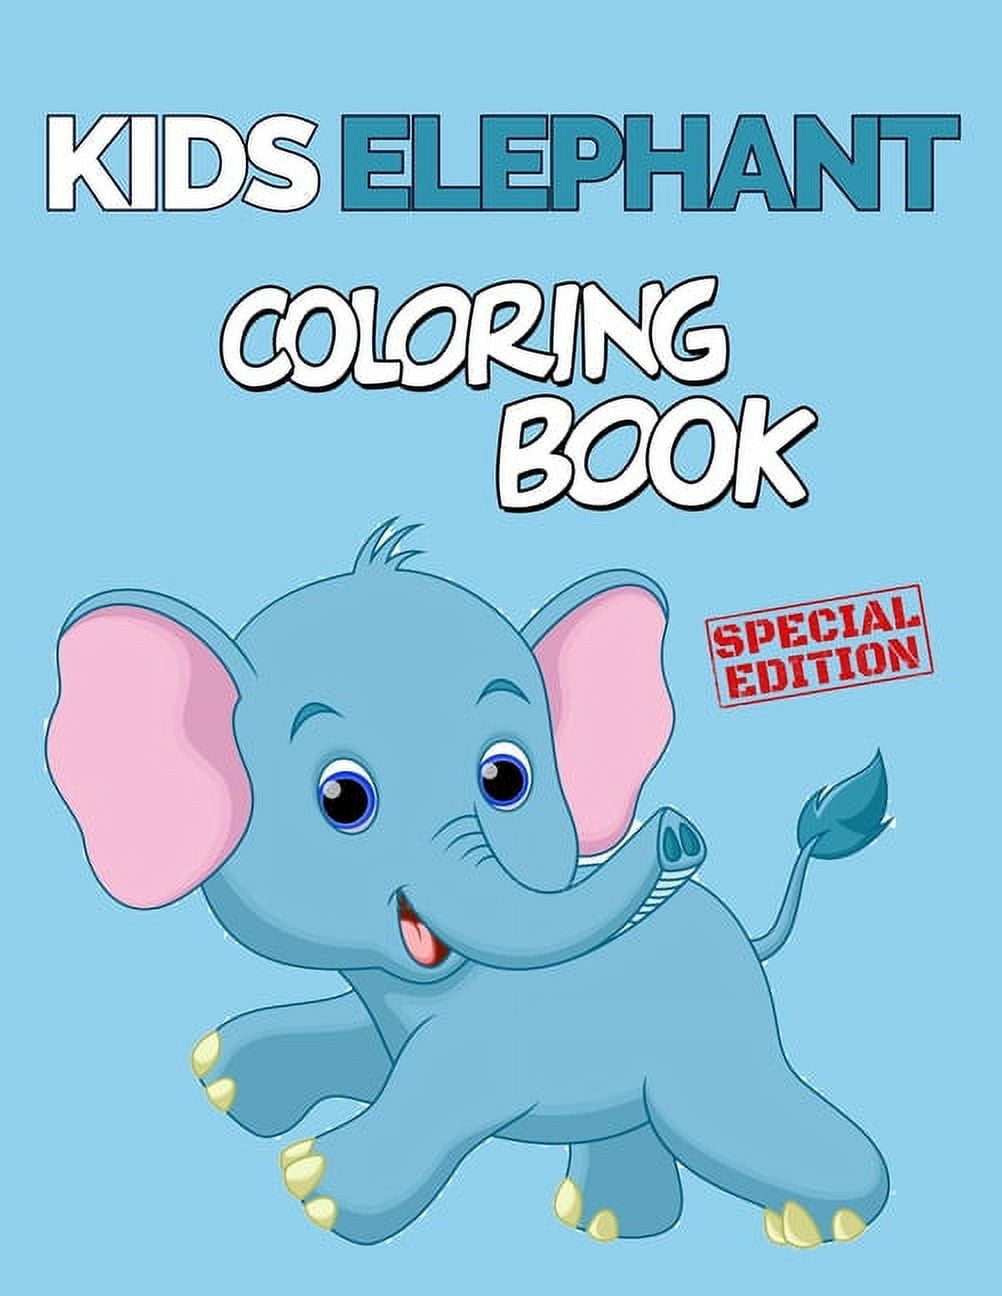 and　Book:　Mindfulness　Inch,　Large　Creativity,　Book:　Cute　152　8.5x11　Stress　Coloring　Kids　Cover　Elephant　and　Coloring　Single-Sided　Fun　Inspire　Glossy　Coloring　Pages,　Animal　(Paperback　Unique　Relieving,